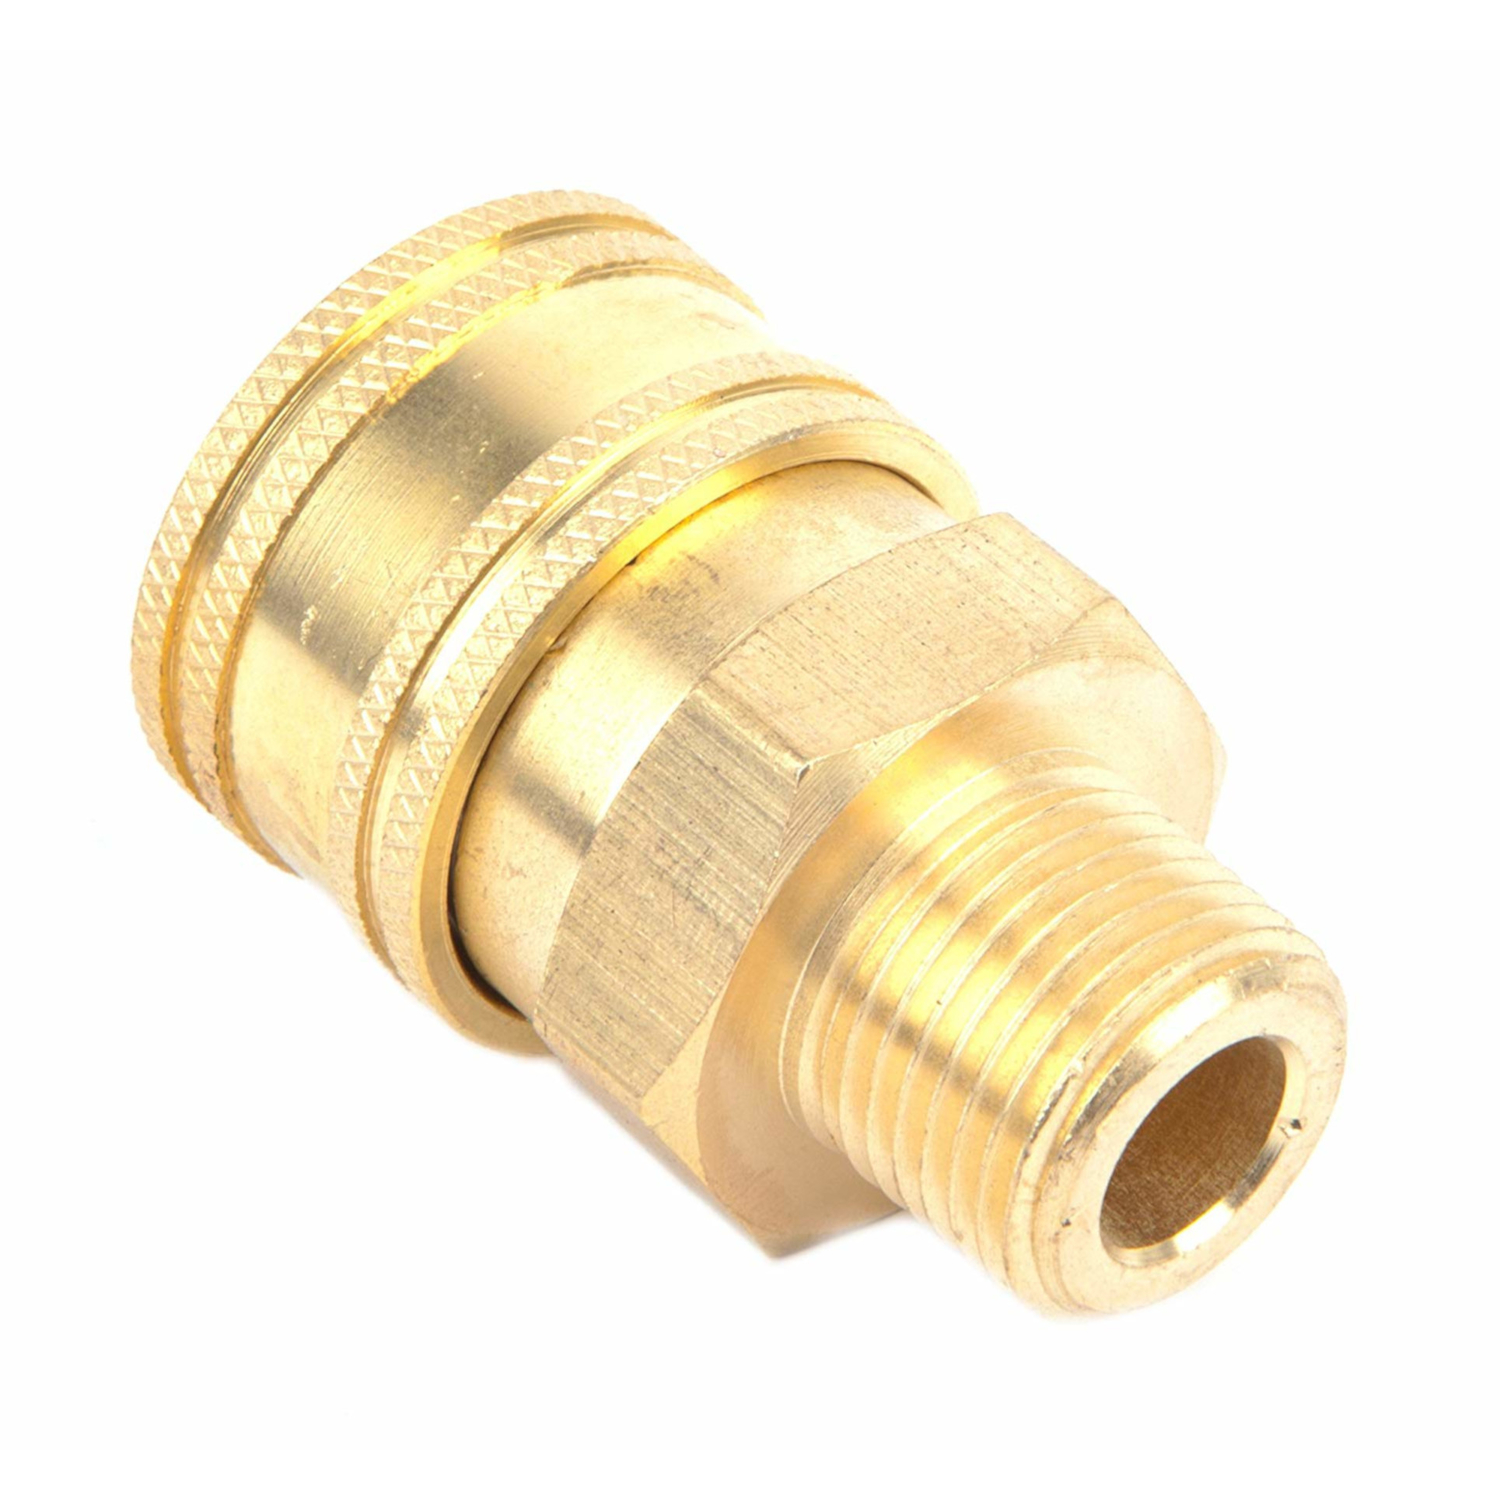 Forney Quick Connect Socket Coupling 4200 psi